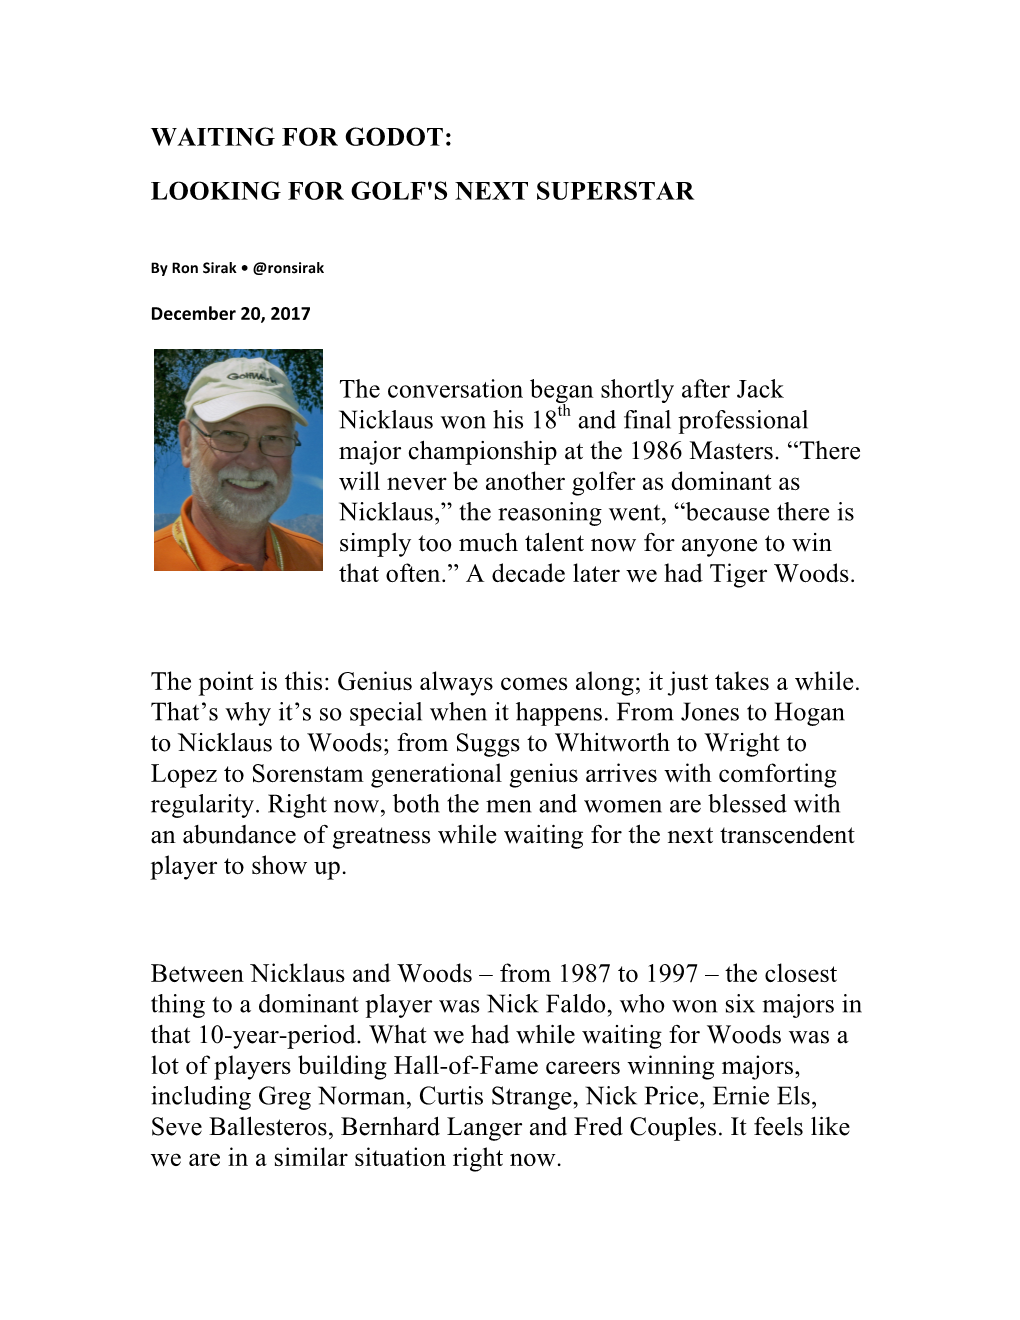 Waiting for Godot: Looking for Golf's Next Superstar